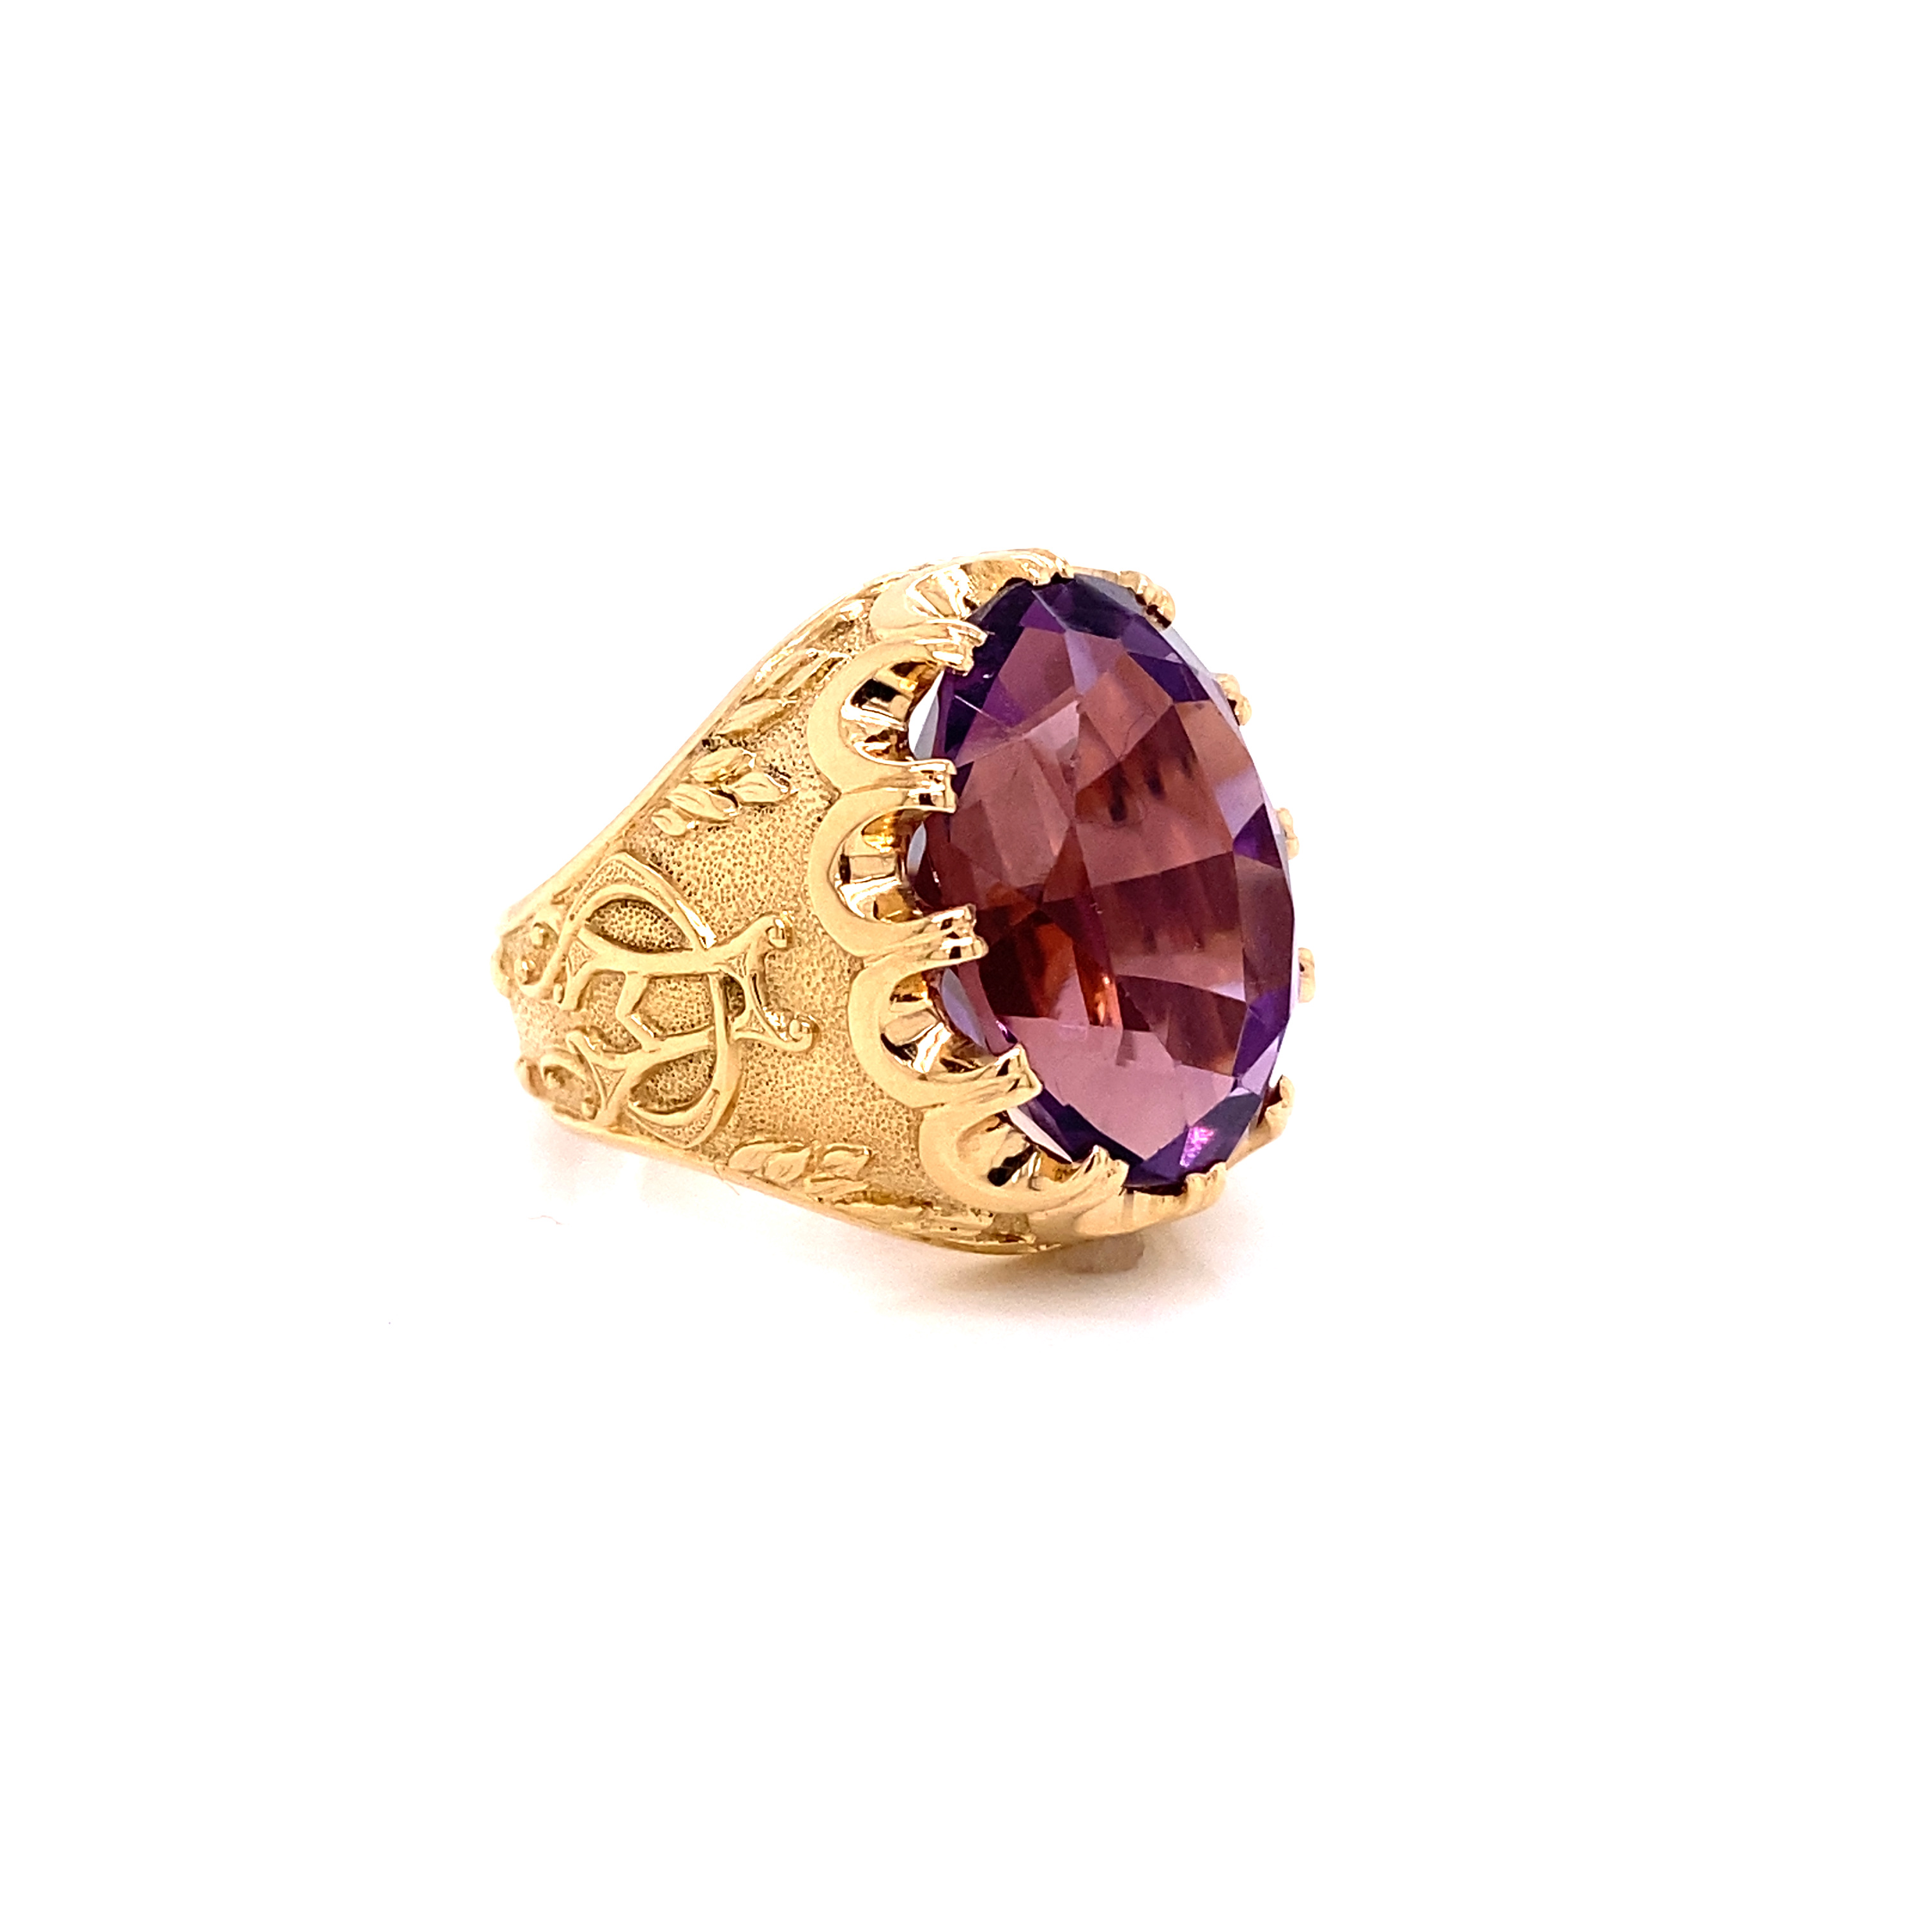 Holy Chi-Rho Gold ring with amethyst Breathtaking Beauty fit for a Bishopethyst Holy Chi-Rho Labarum Gold Ring